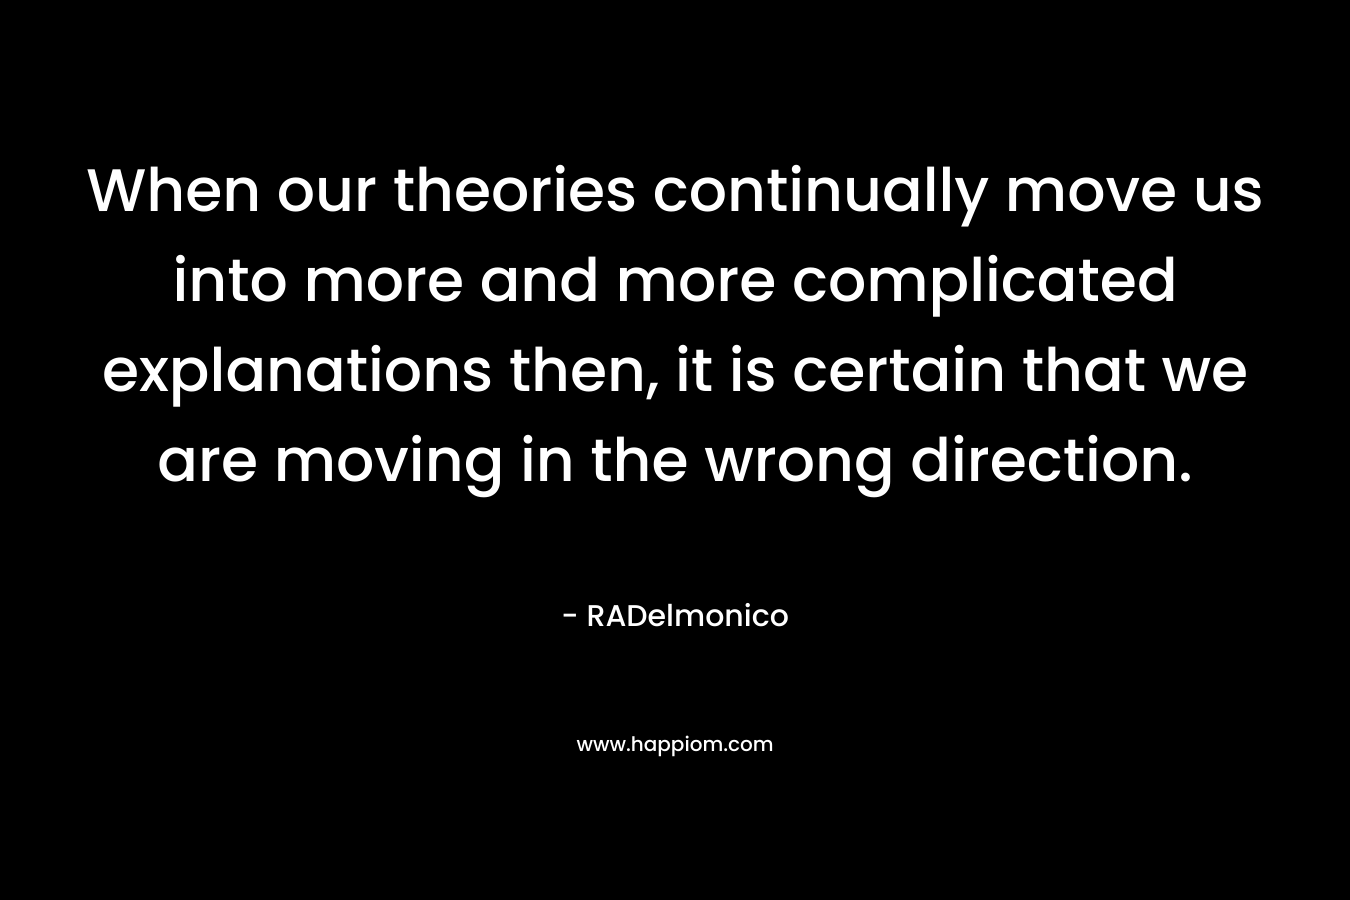 When our theories continually move us into more and more complicated explanations then, it is certain that we are moving in the wrong direction.